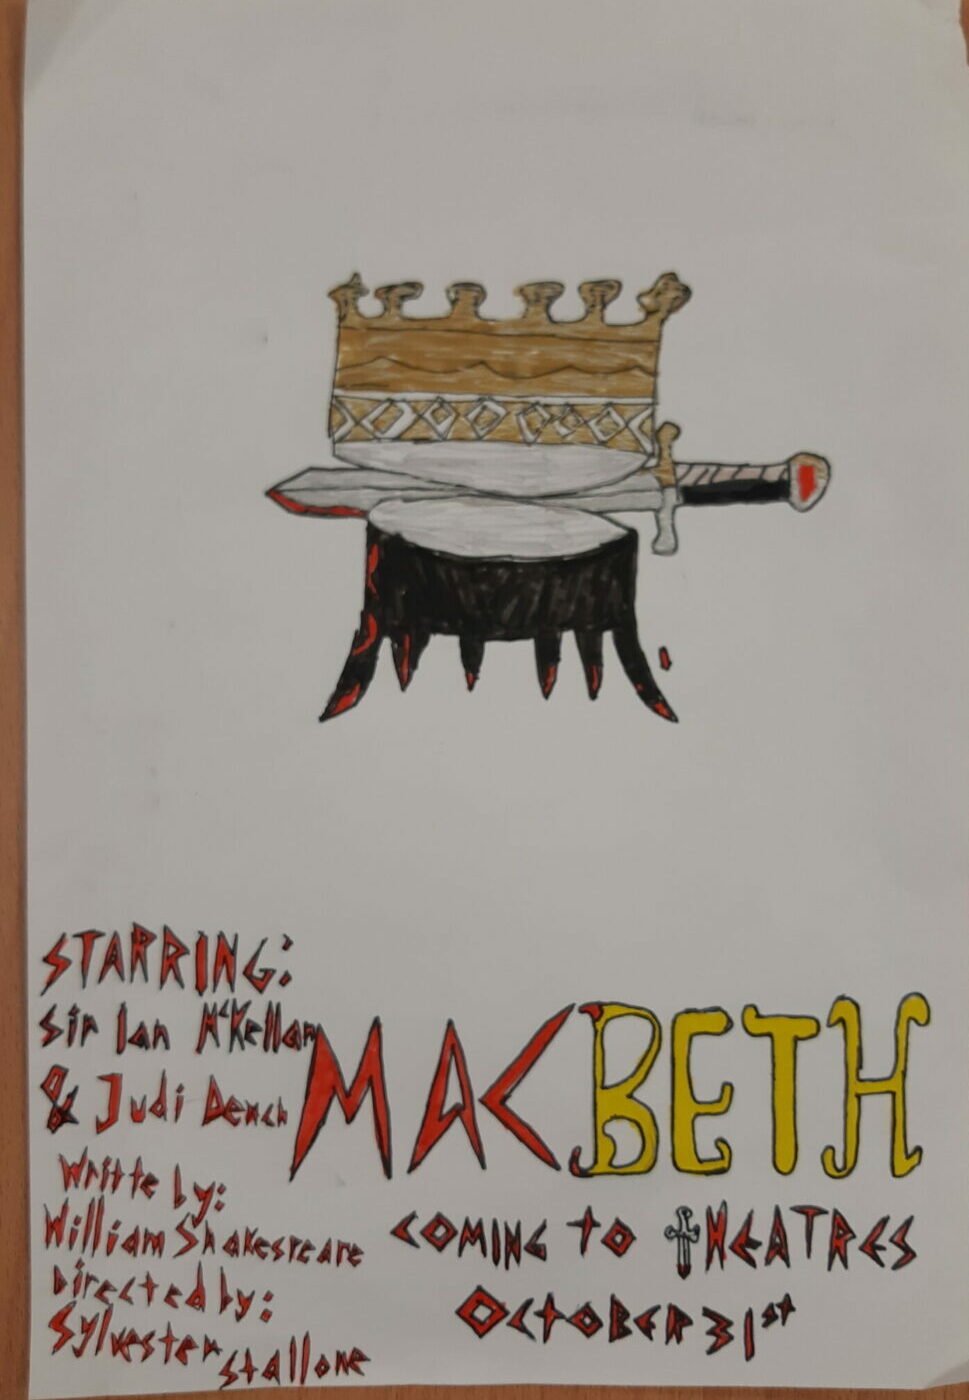 Poster inspired by the light and dark imagery in Macbeth.